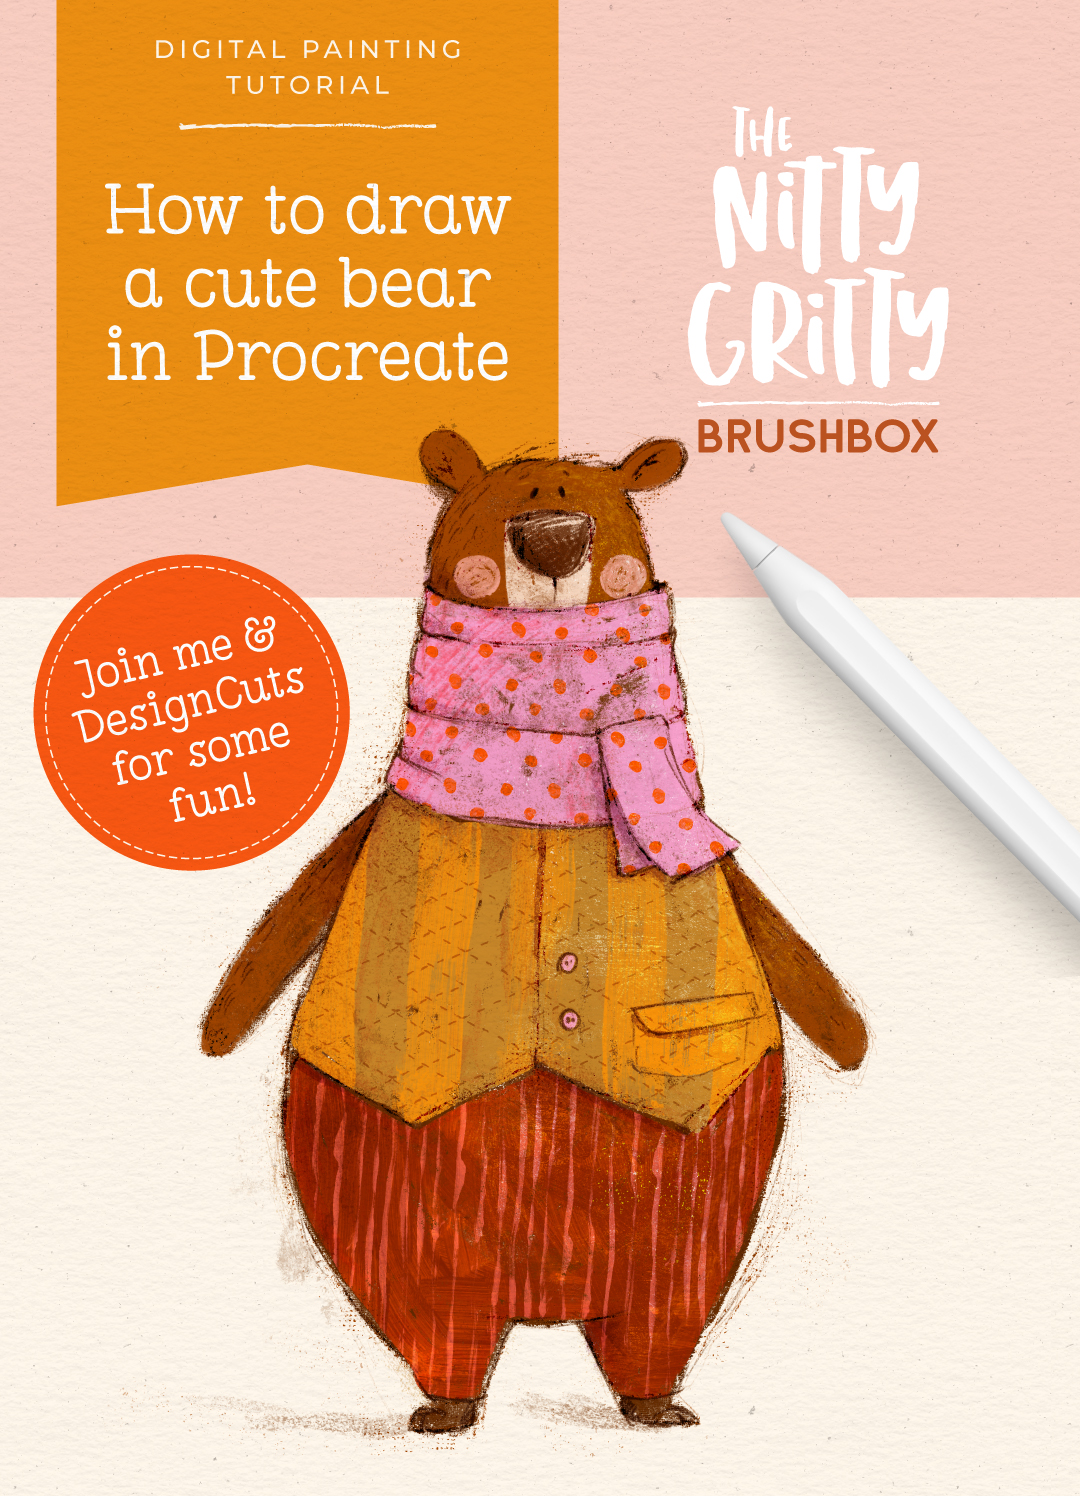 How to draw a cute bear in Procreate